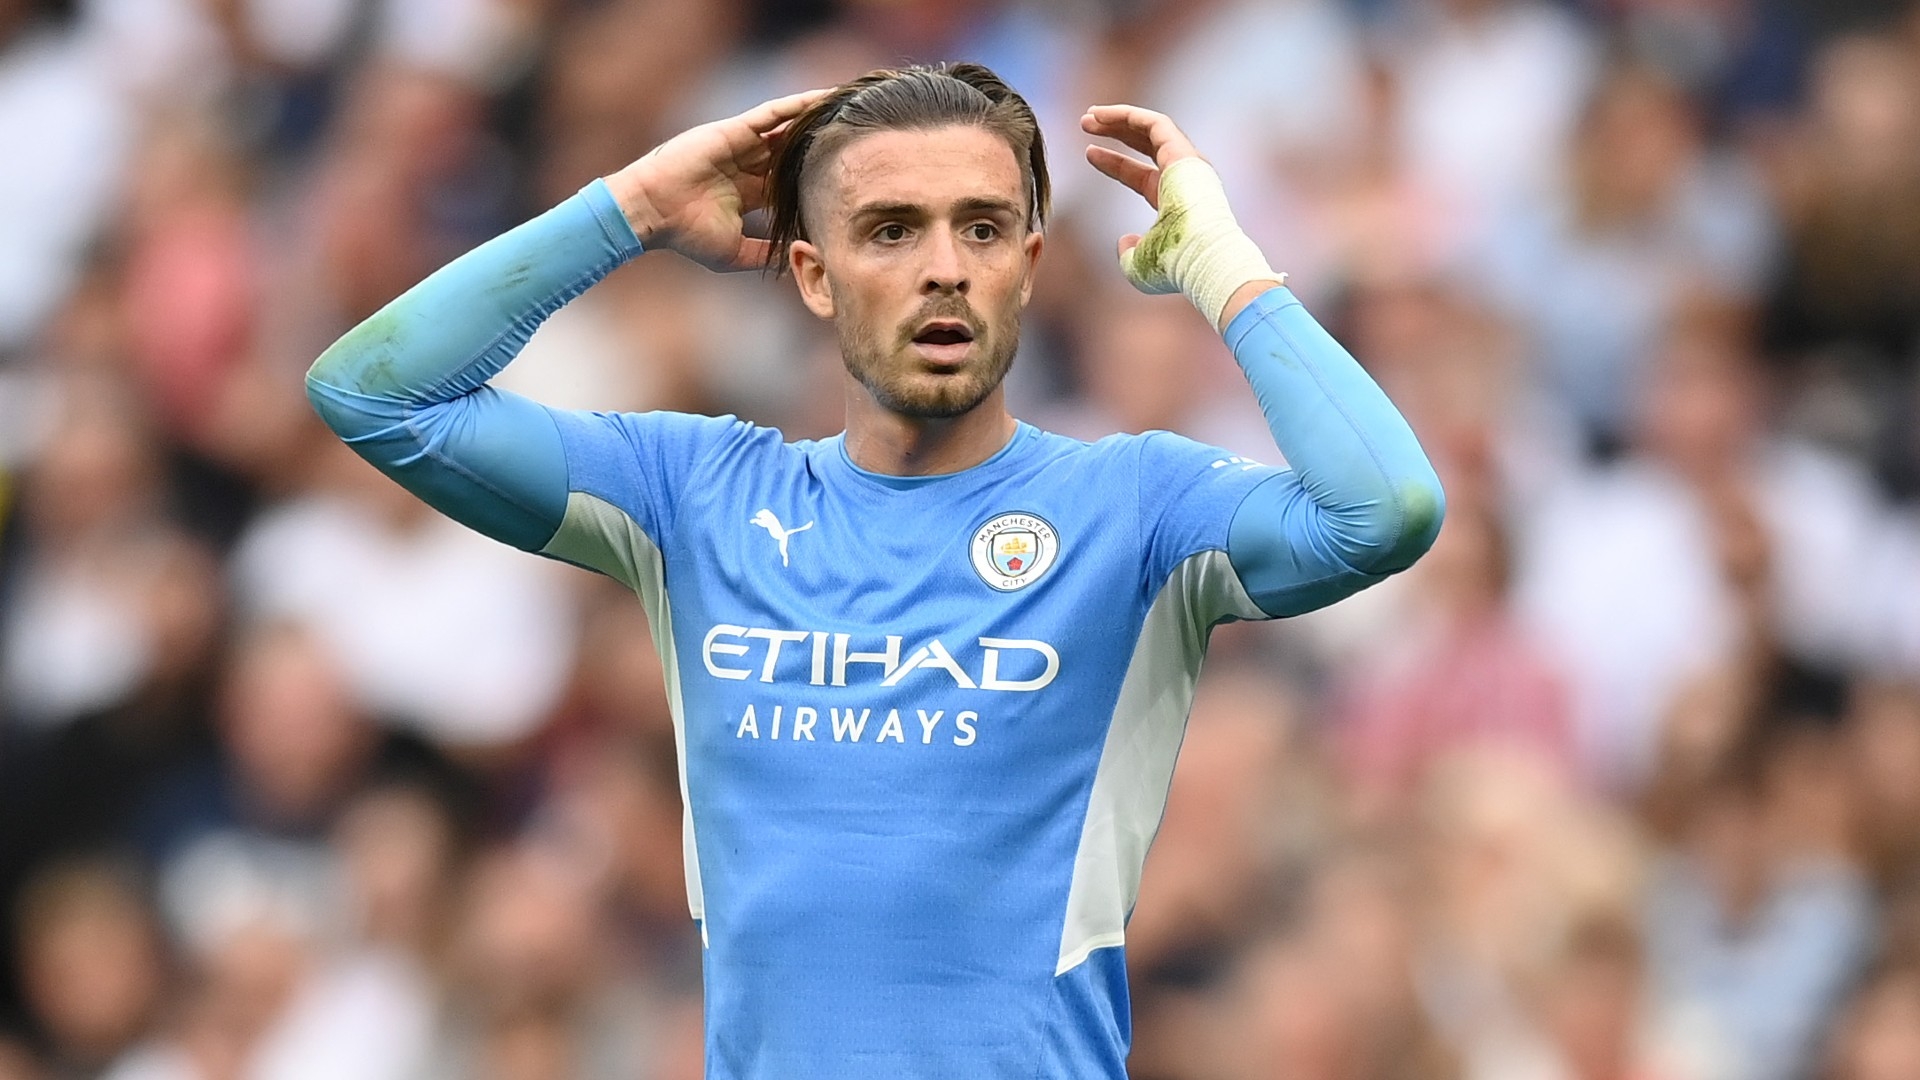 Grealish had an incredible debut' praises Man City's £100m man for showing 'personality' in Spurs defeat